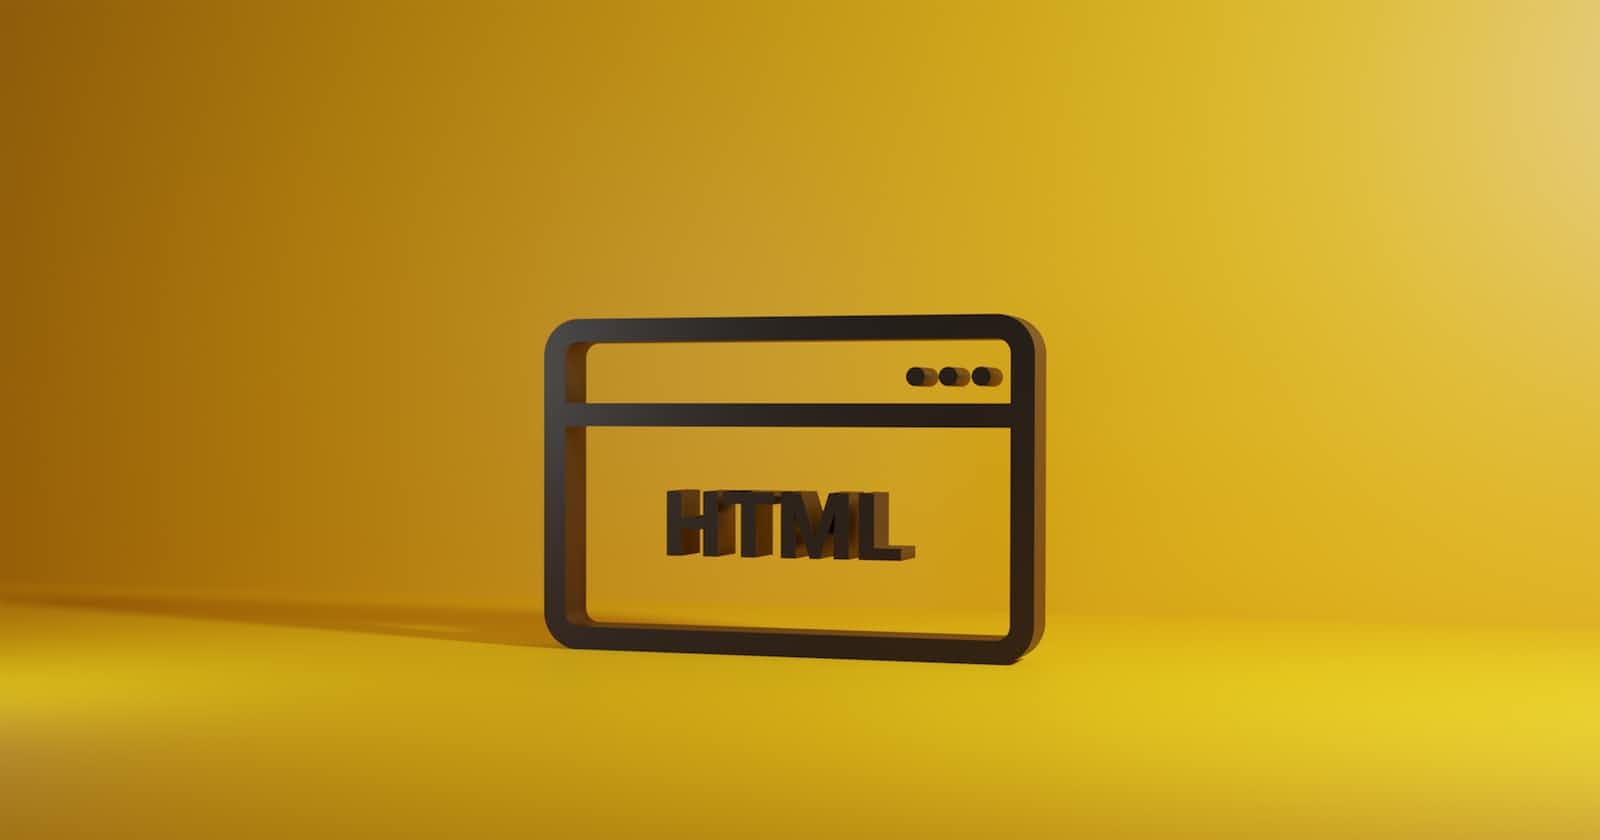 Introduction to Html